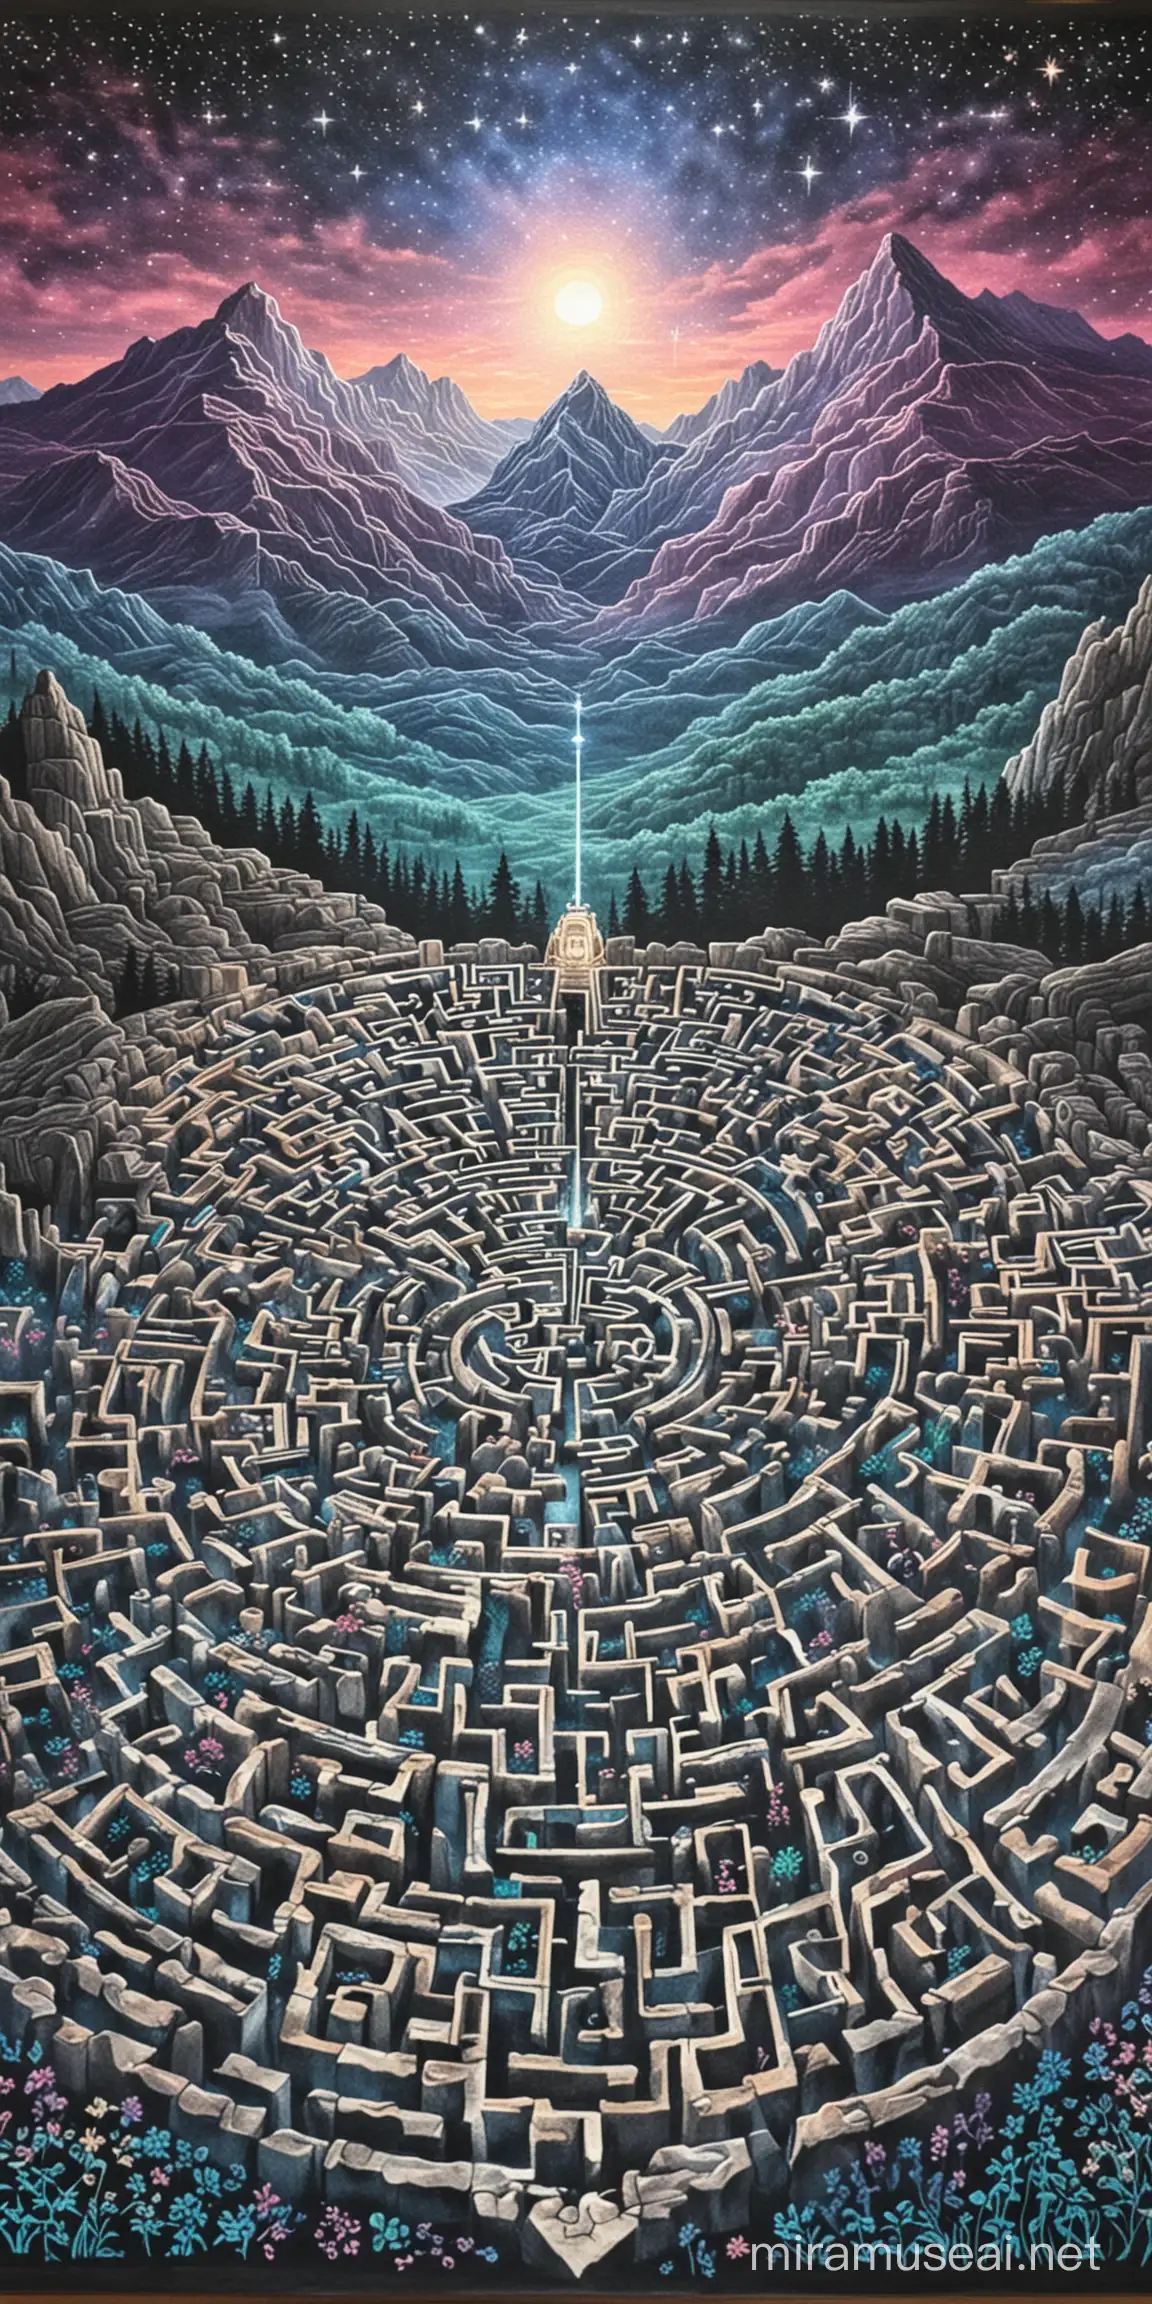 Enchanting Pastel Labyrinth Drawing with Mountain Scenery and Shining Stars